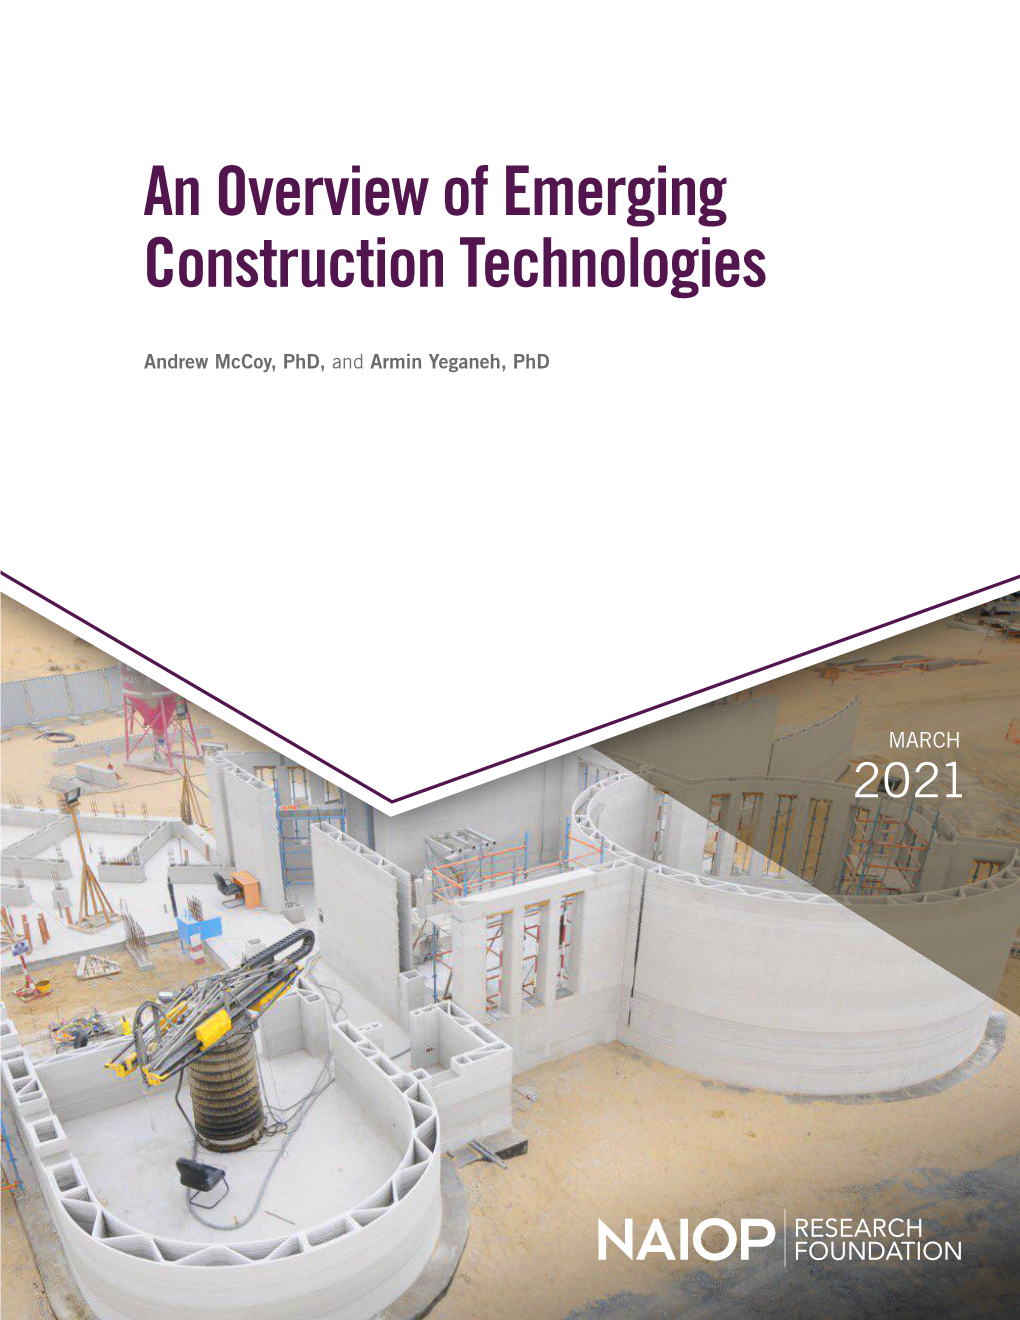 An Overview of Emerging Construction Technologies